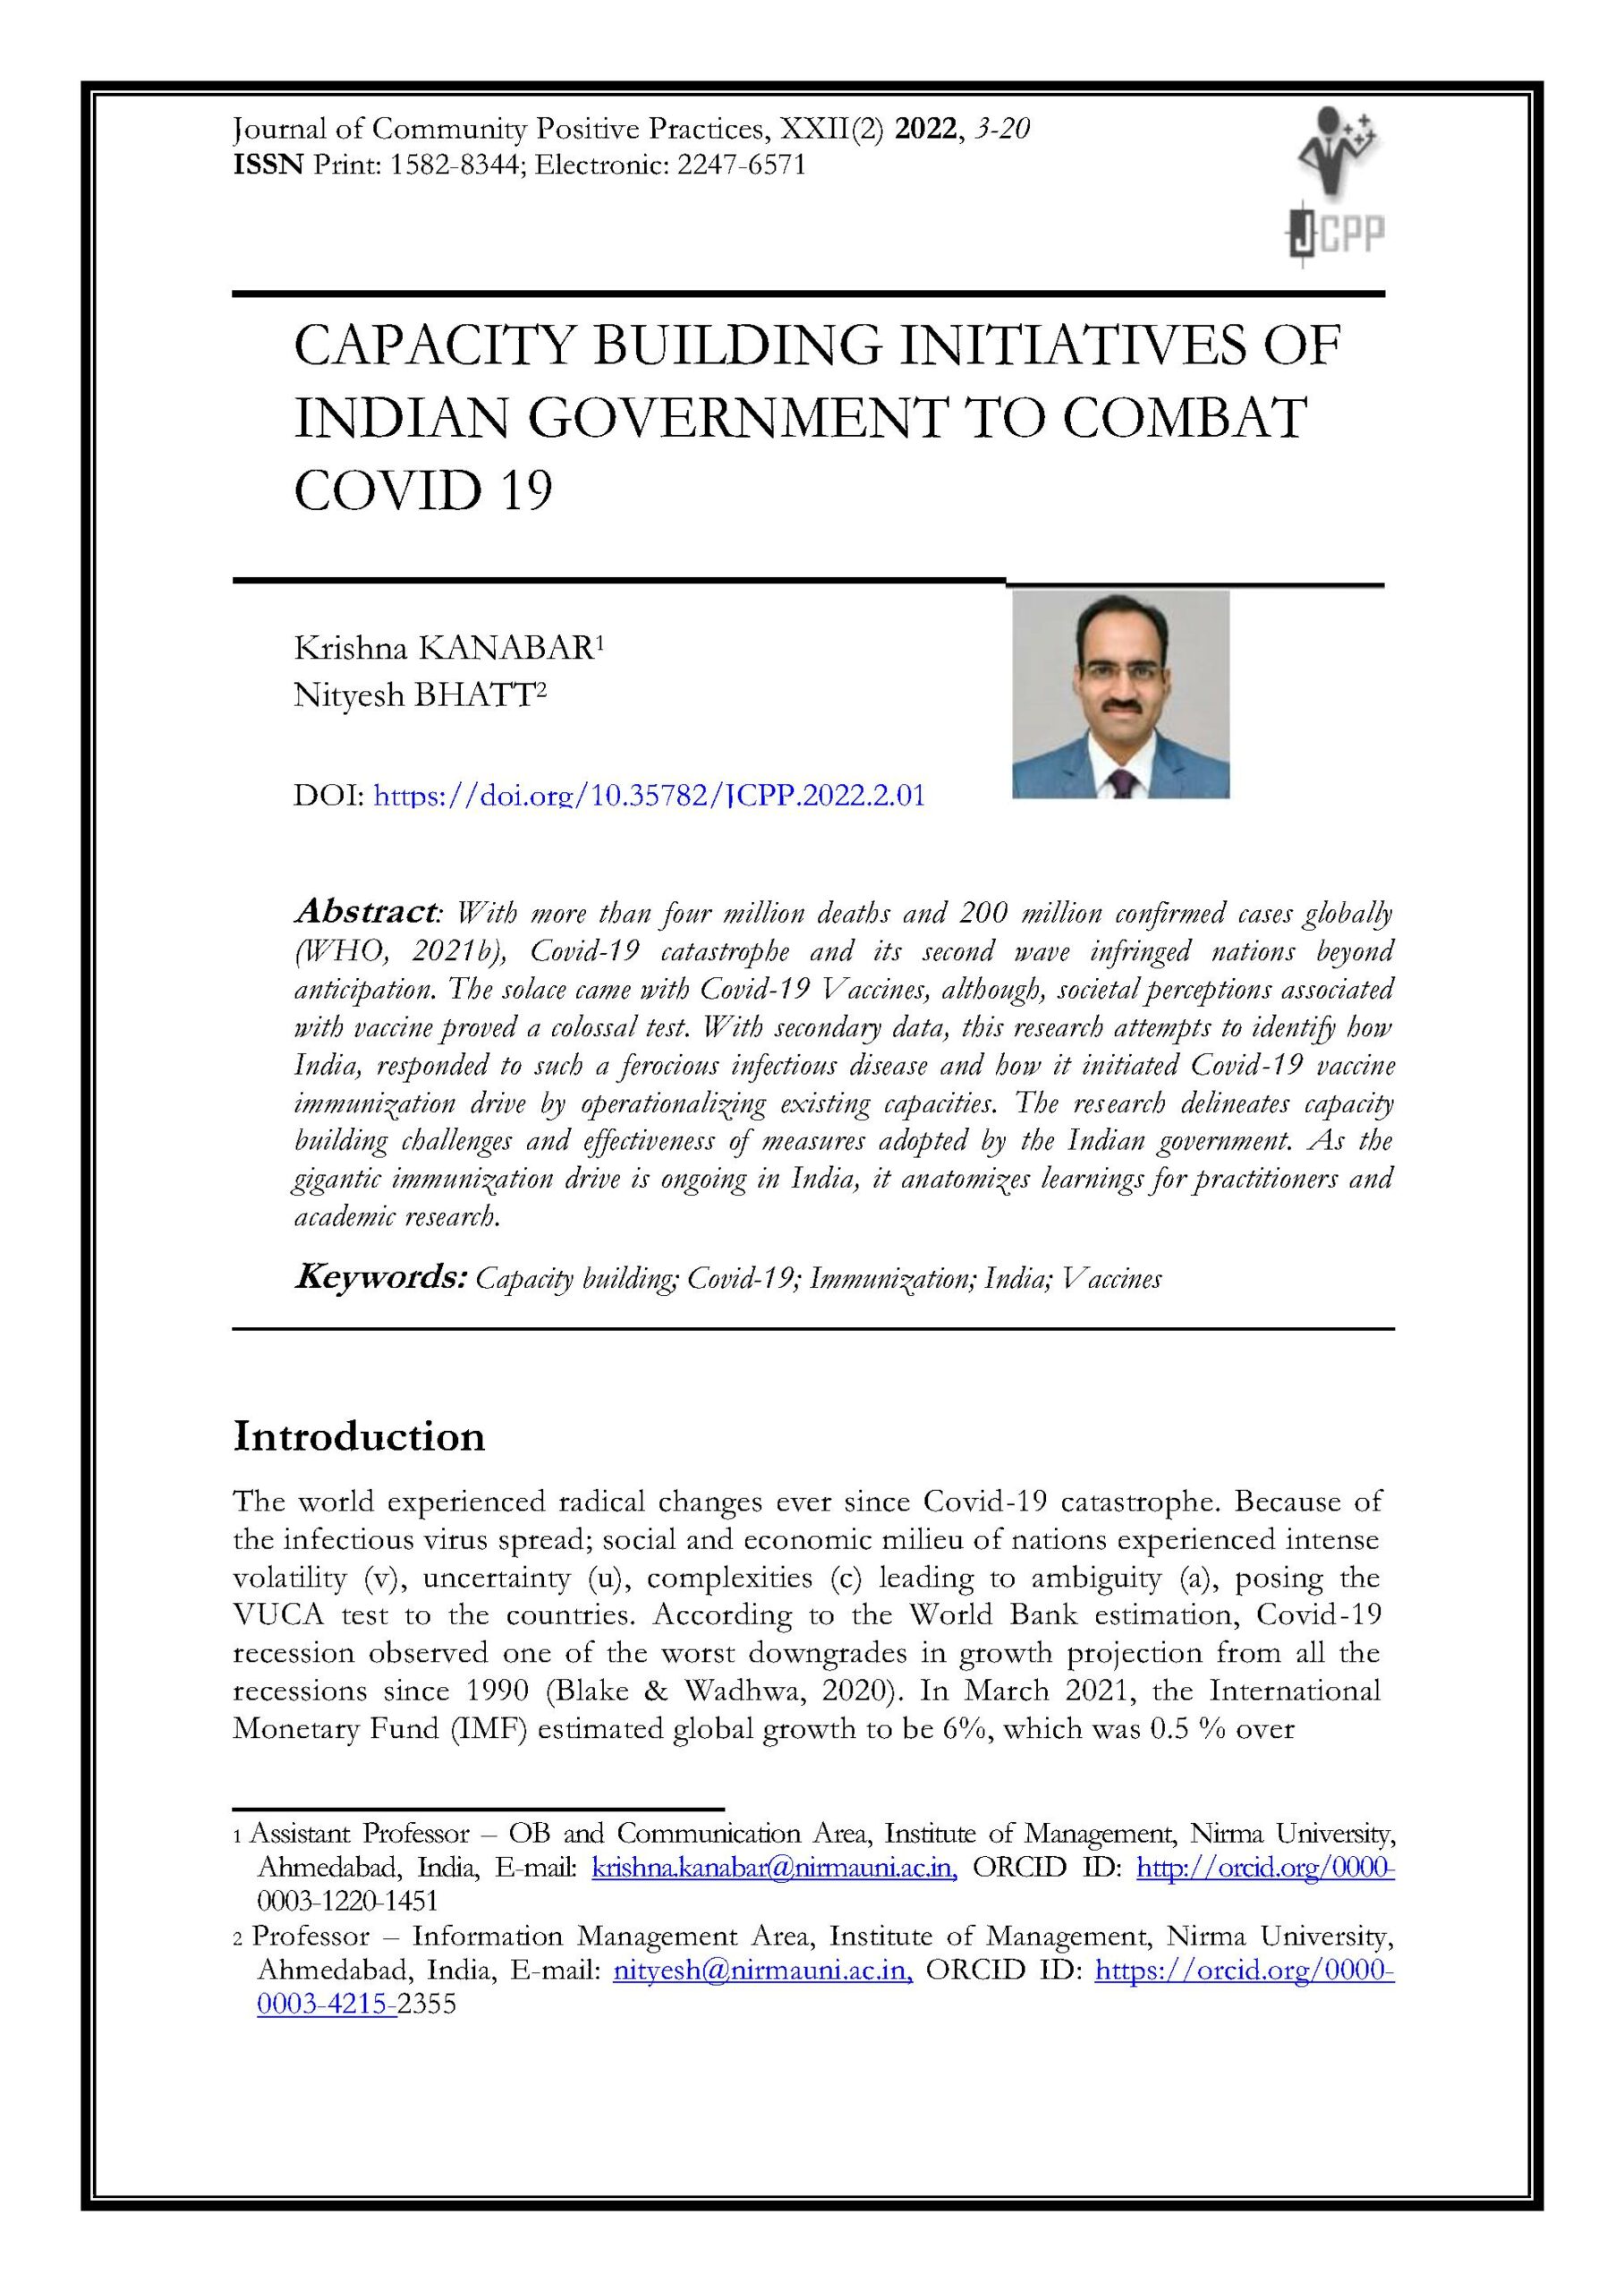 Capacity Building Initiatives of Indian Government to Combat Covid 19